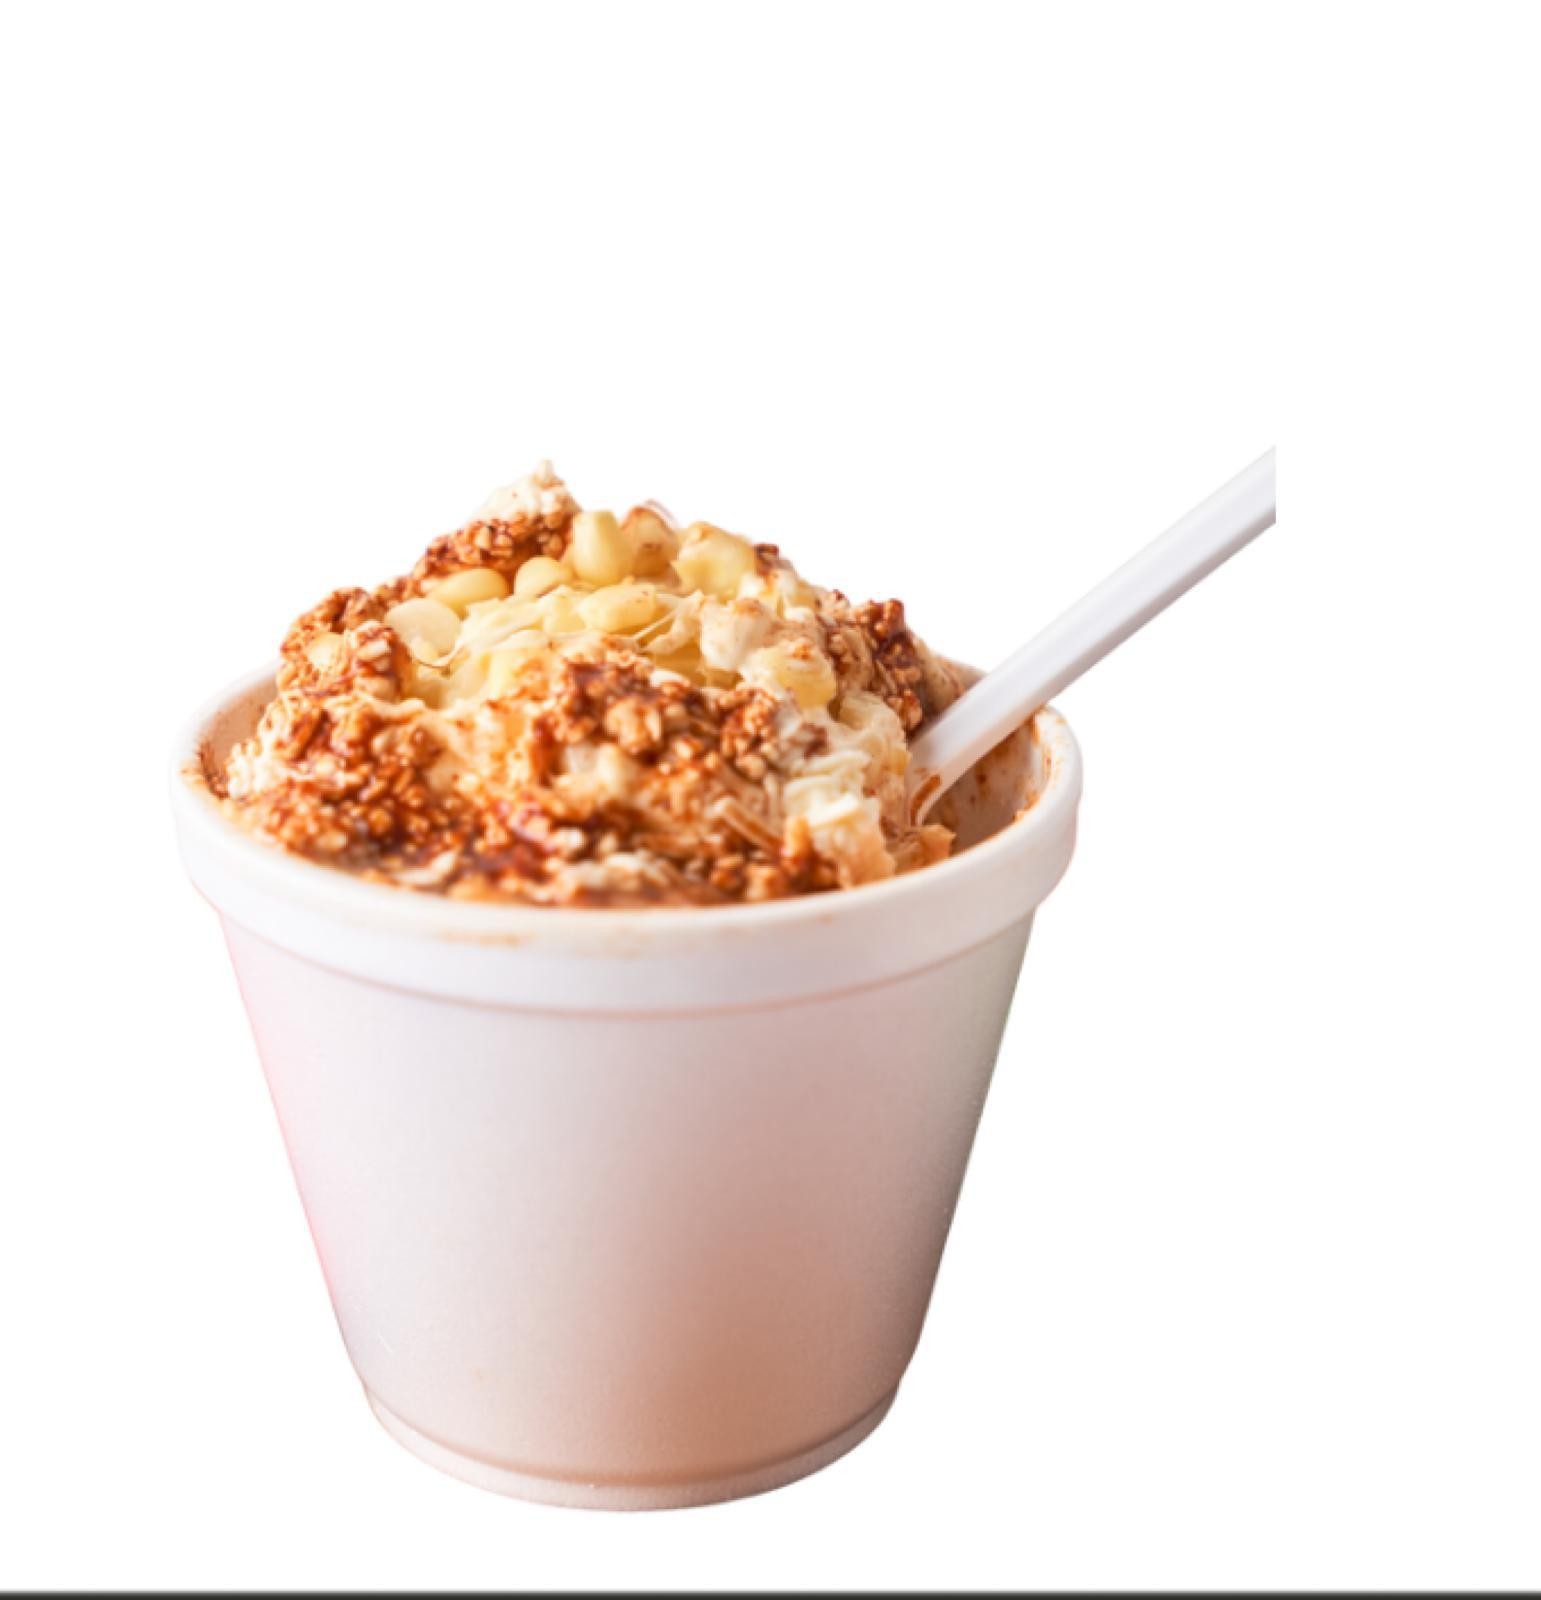 Corn in a cup (esquites)